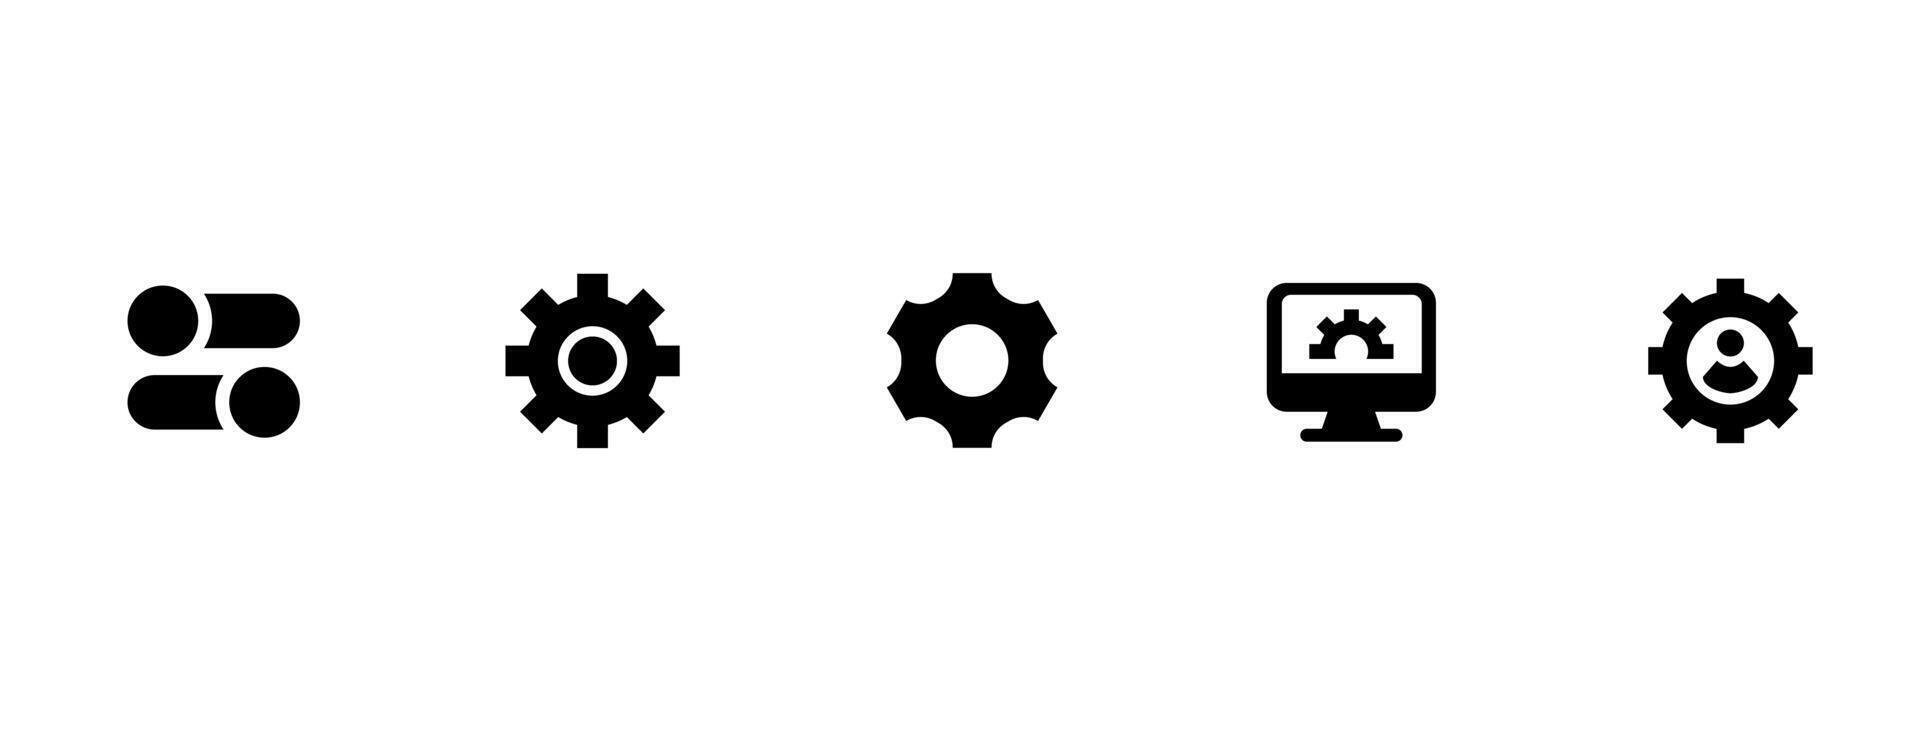 Setup and Settings Icons Set. Collection of simple linear web icons such Installation, Settings, Options, Download, Update, Gears and others and others. Editable vector stroke.